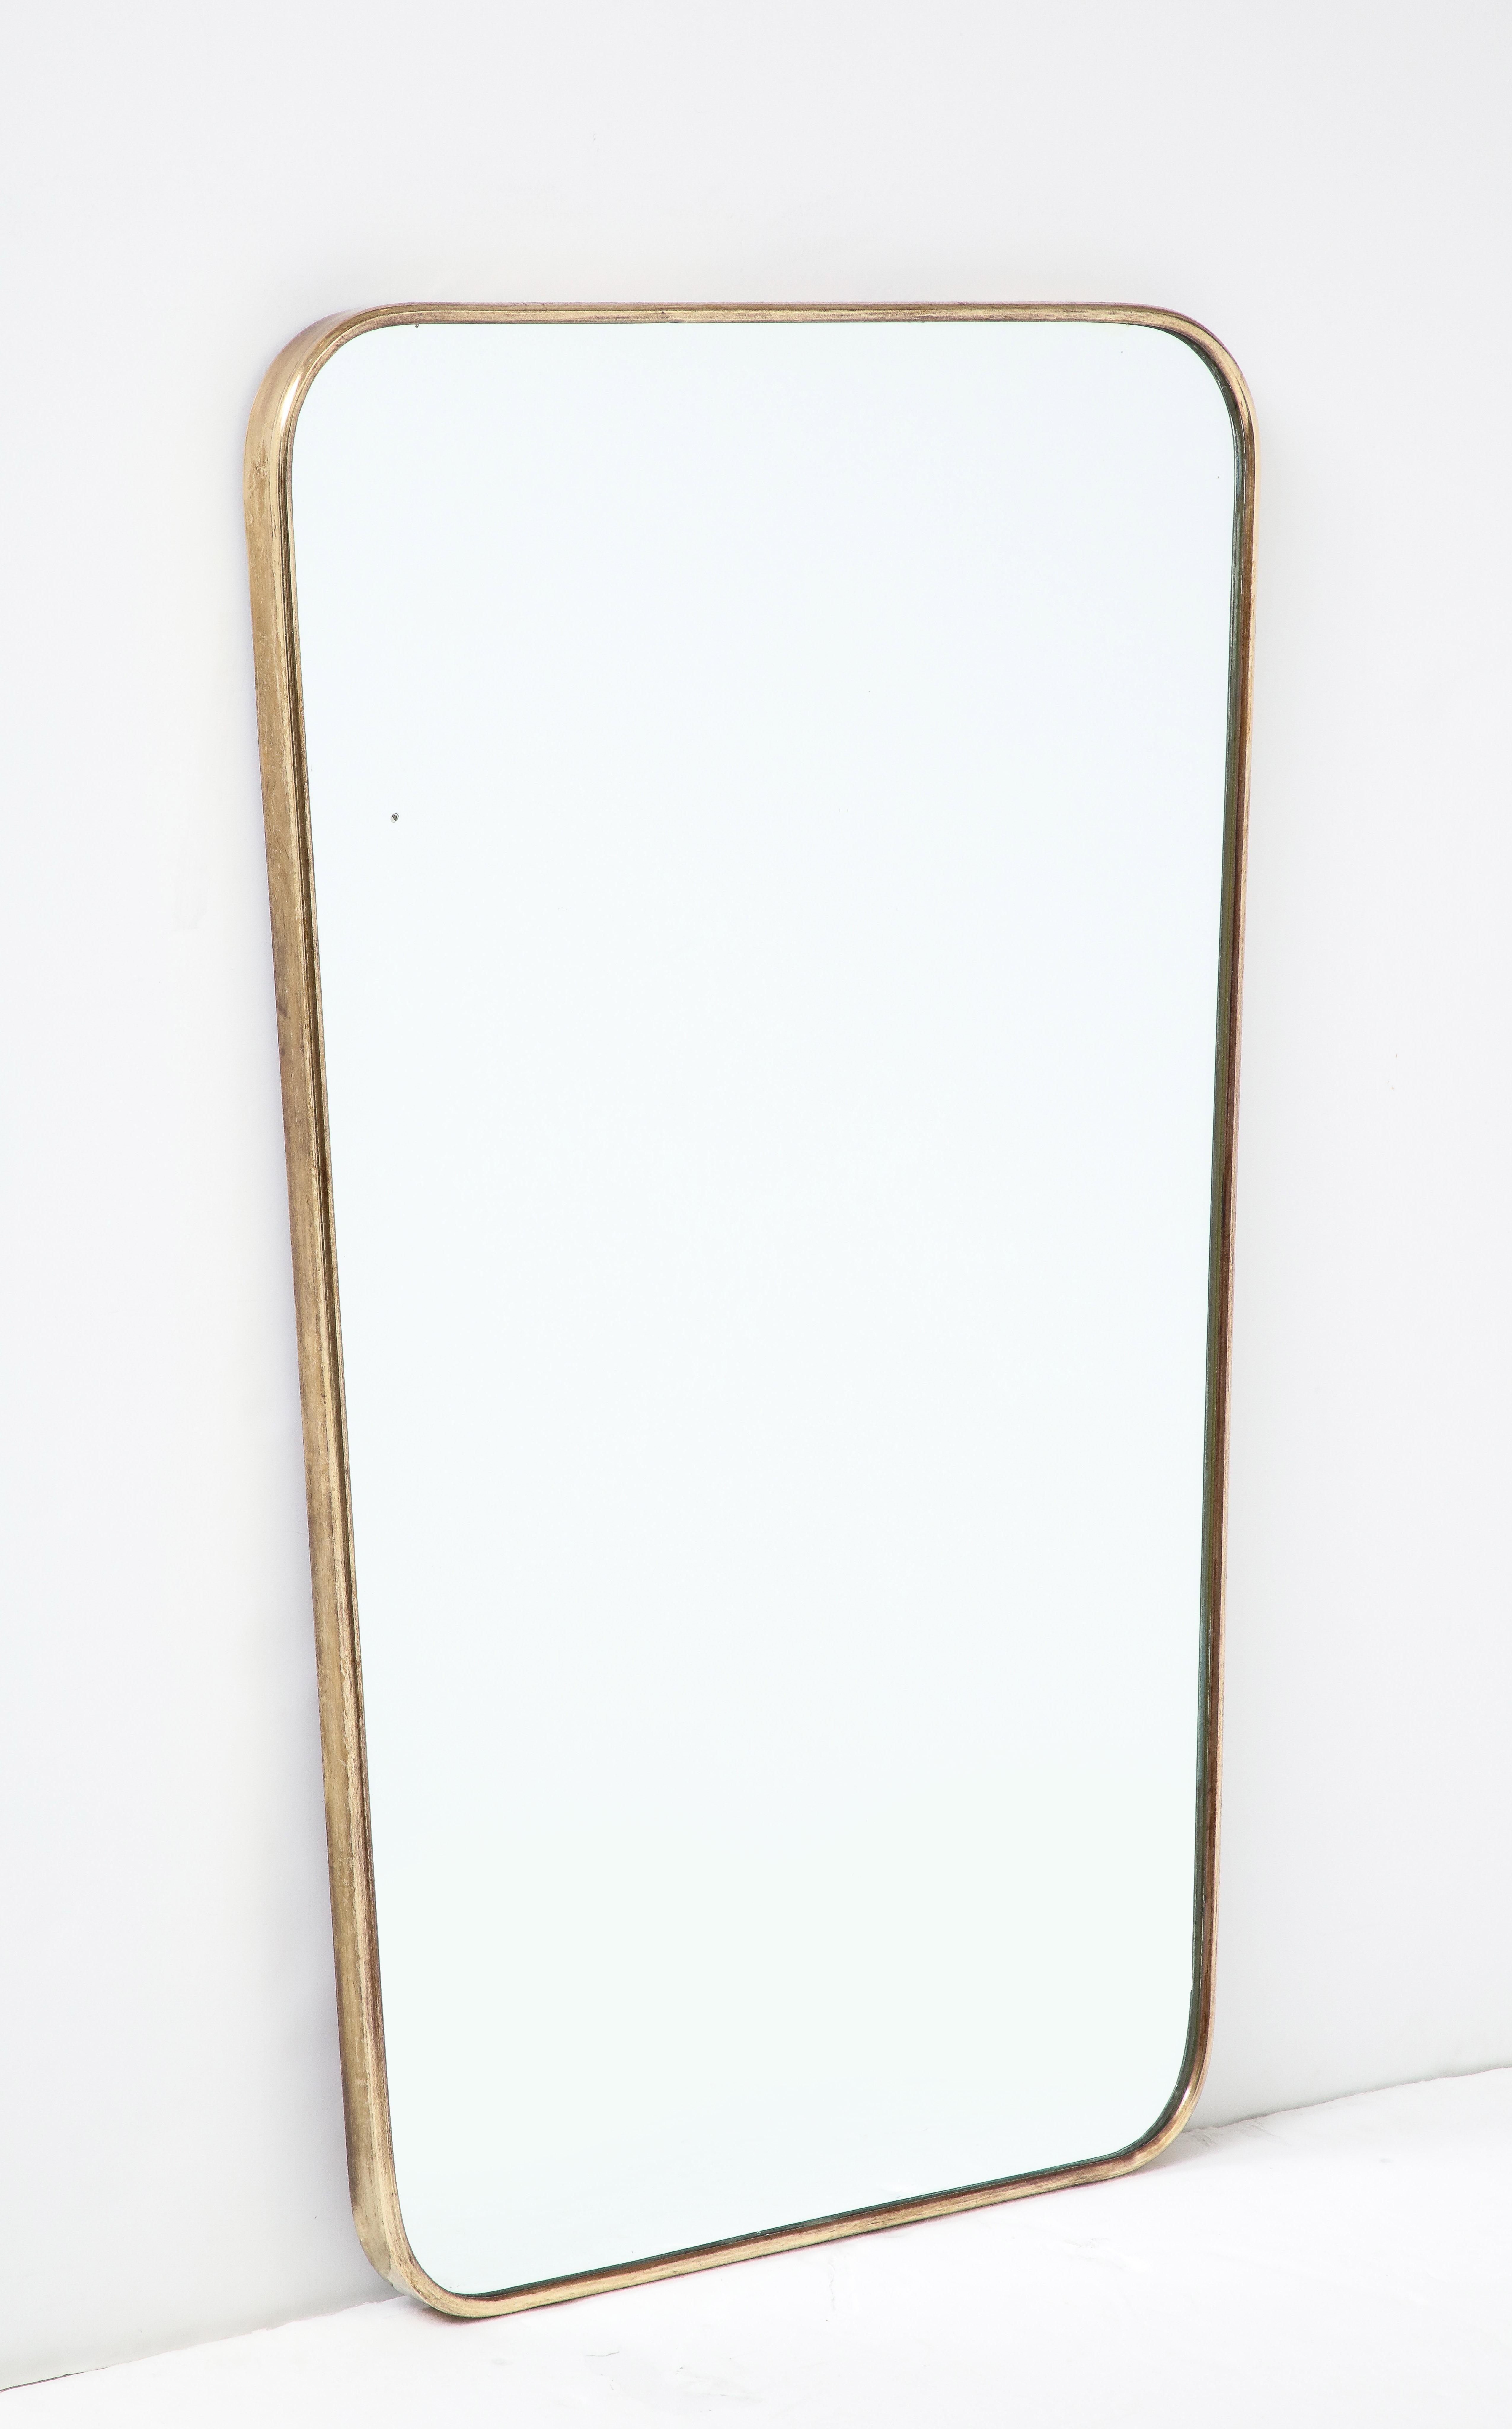 1950s Italian lovely shaped brass wall mirror with gently curved corners and tapering towards the bottom. The brass frame has a beautiful aged patina and original mirrored glass with wood backing.